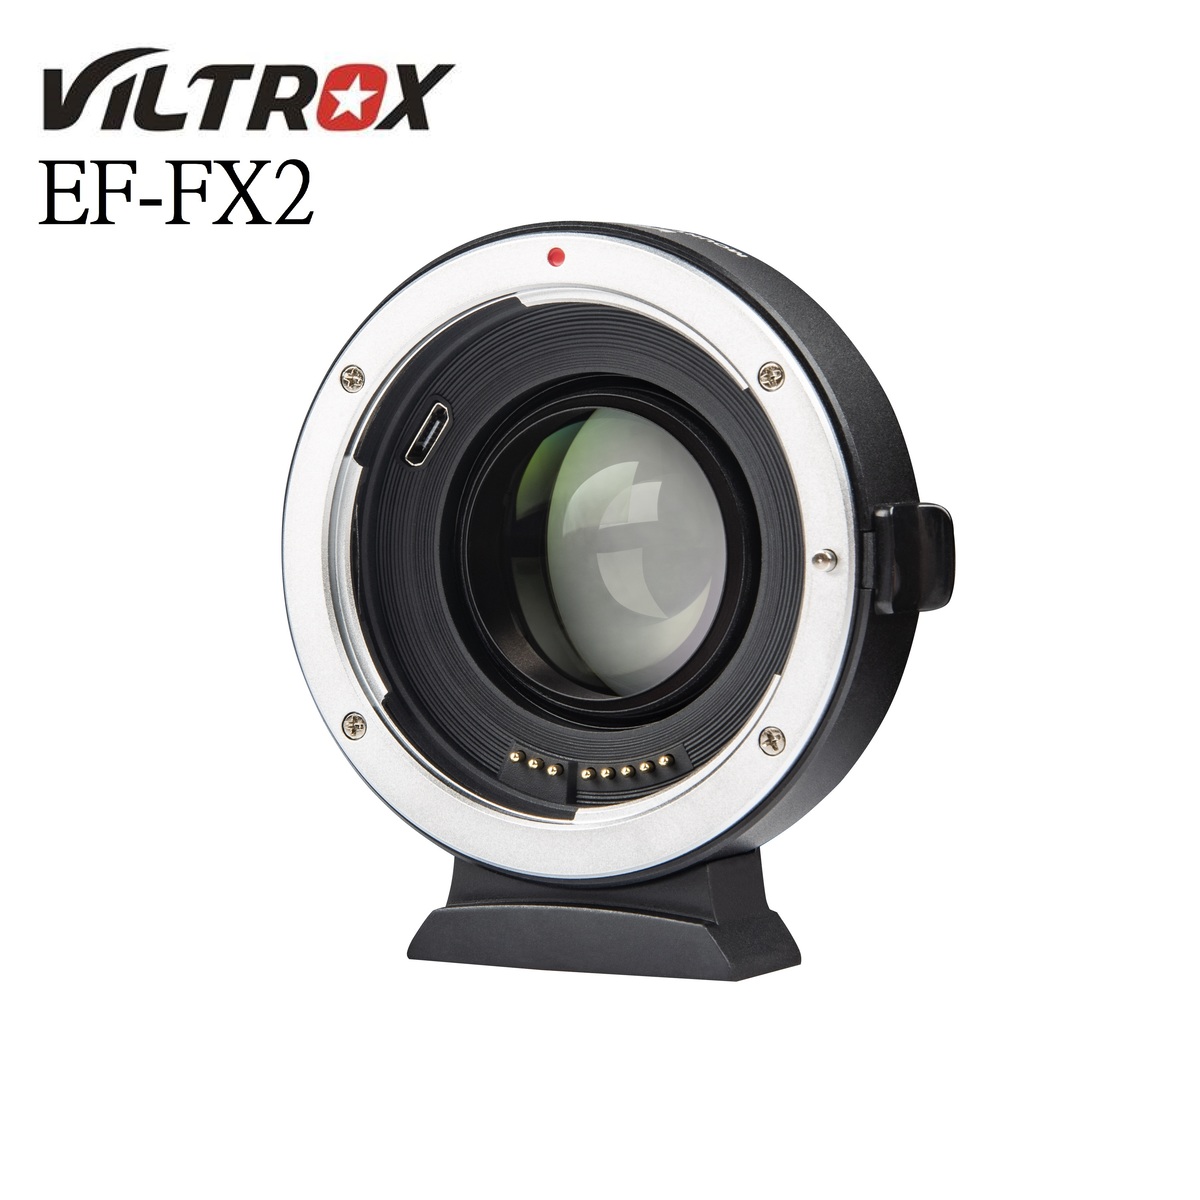 Viltrox EF-FX2 Electronic Booster Adapter